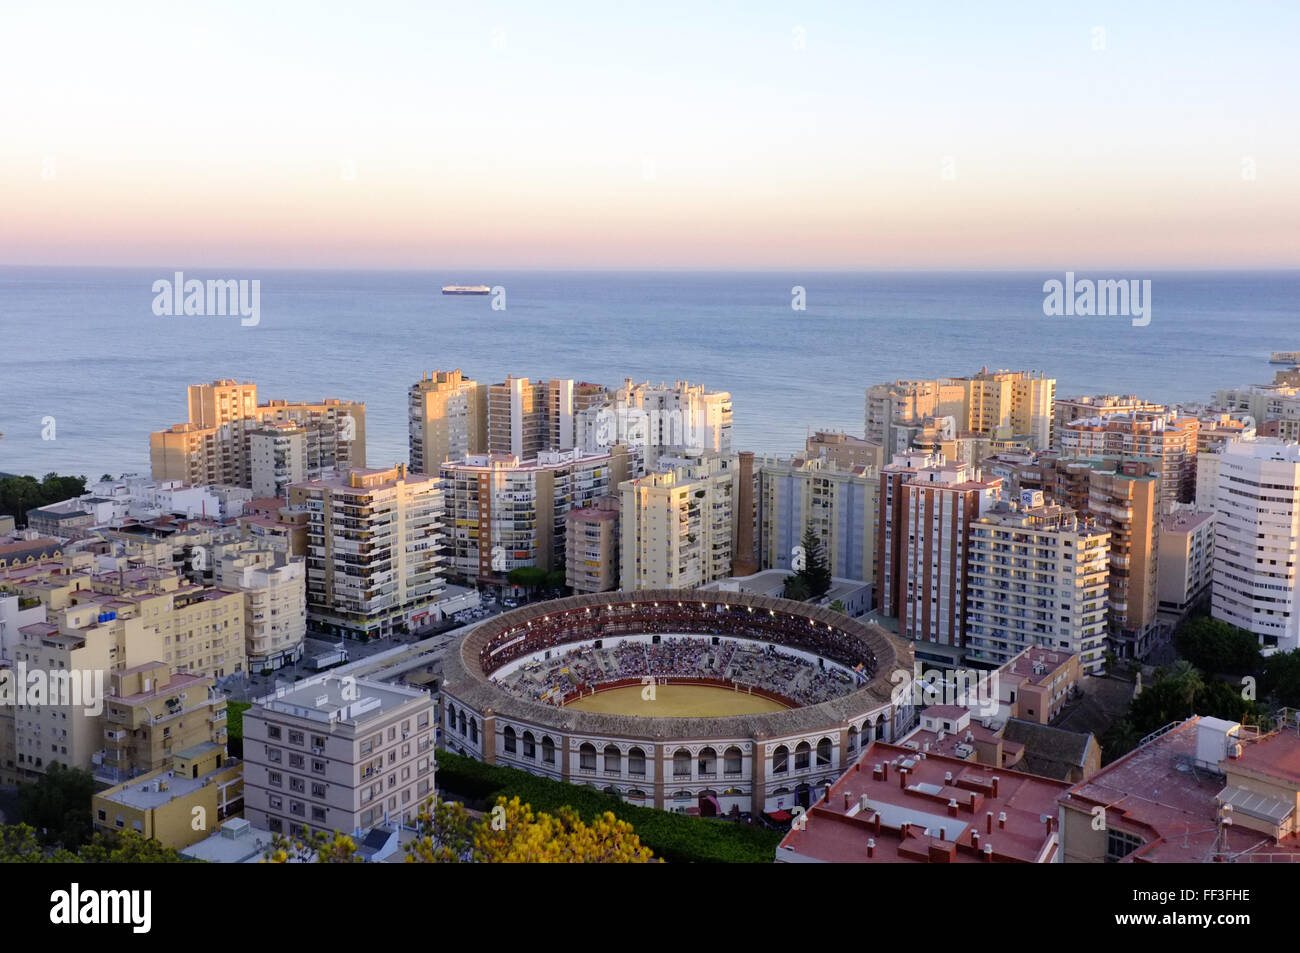 La Malagueta bullring in Malaga, Spain as seen from the hills above the town. A bullfight is taking place. Stock Photo